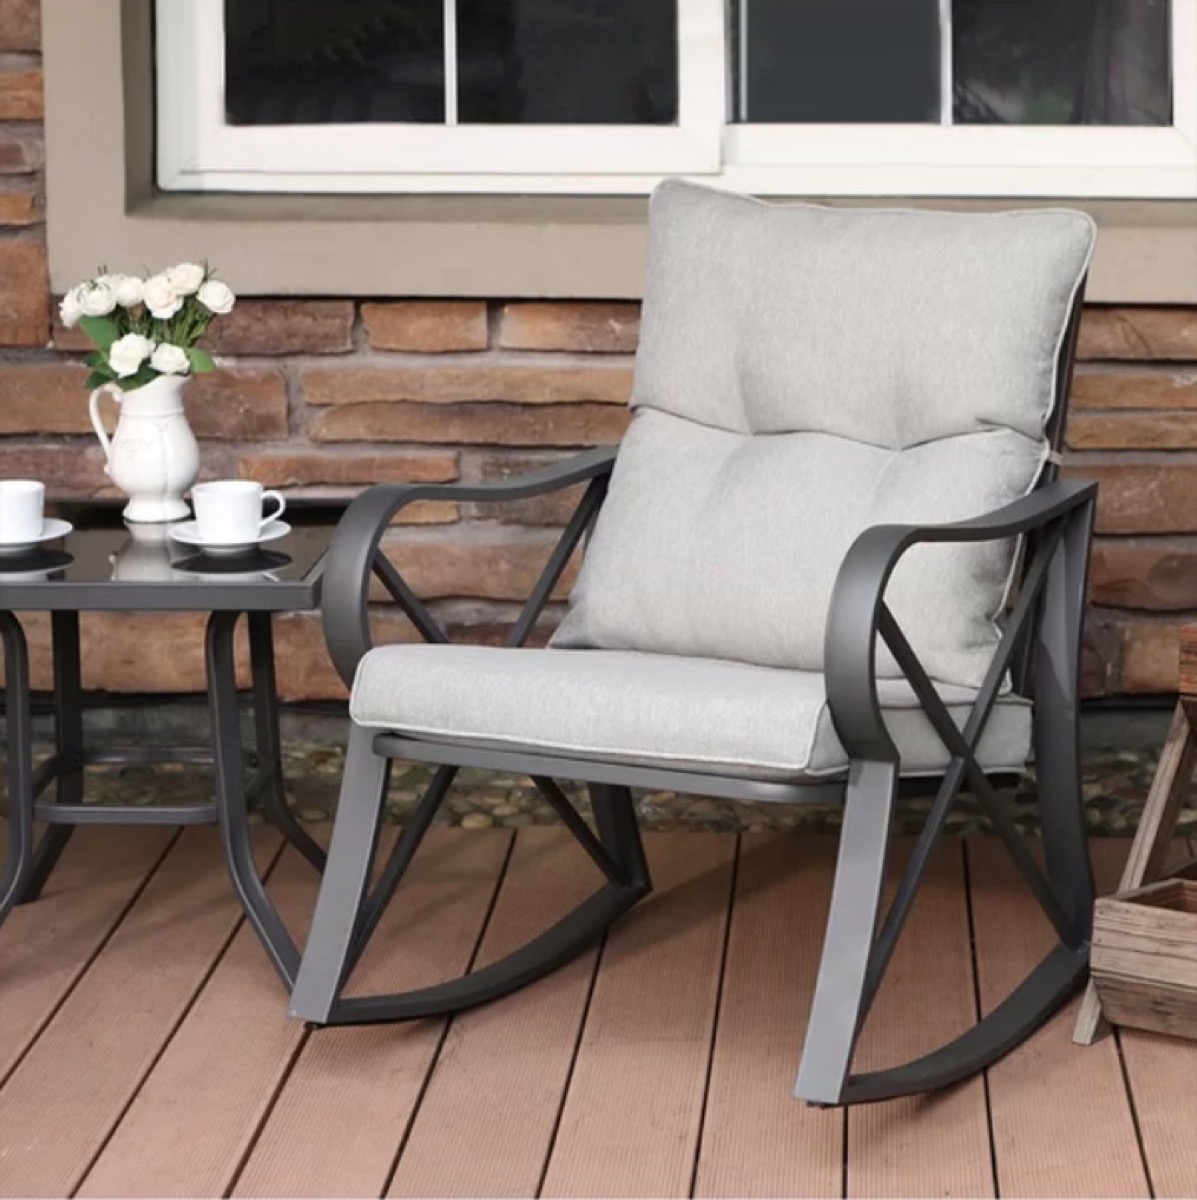 chair and table with metal legs on porch